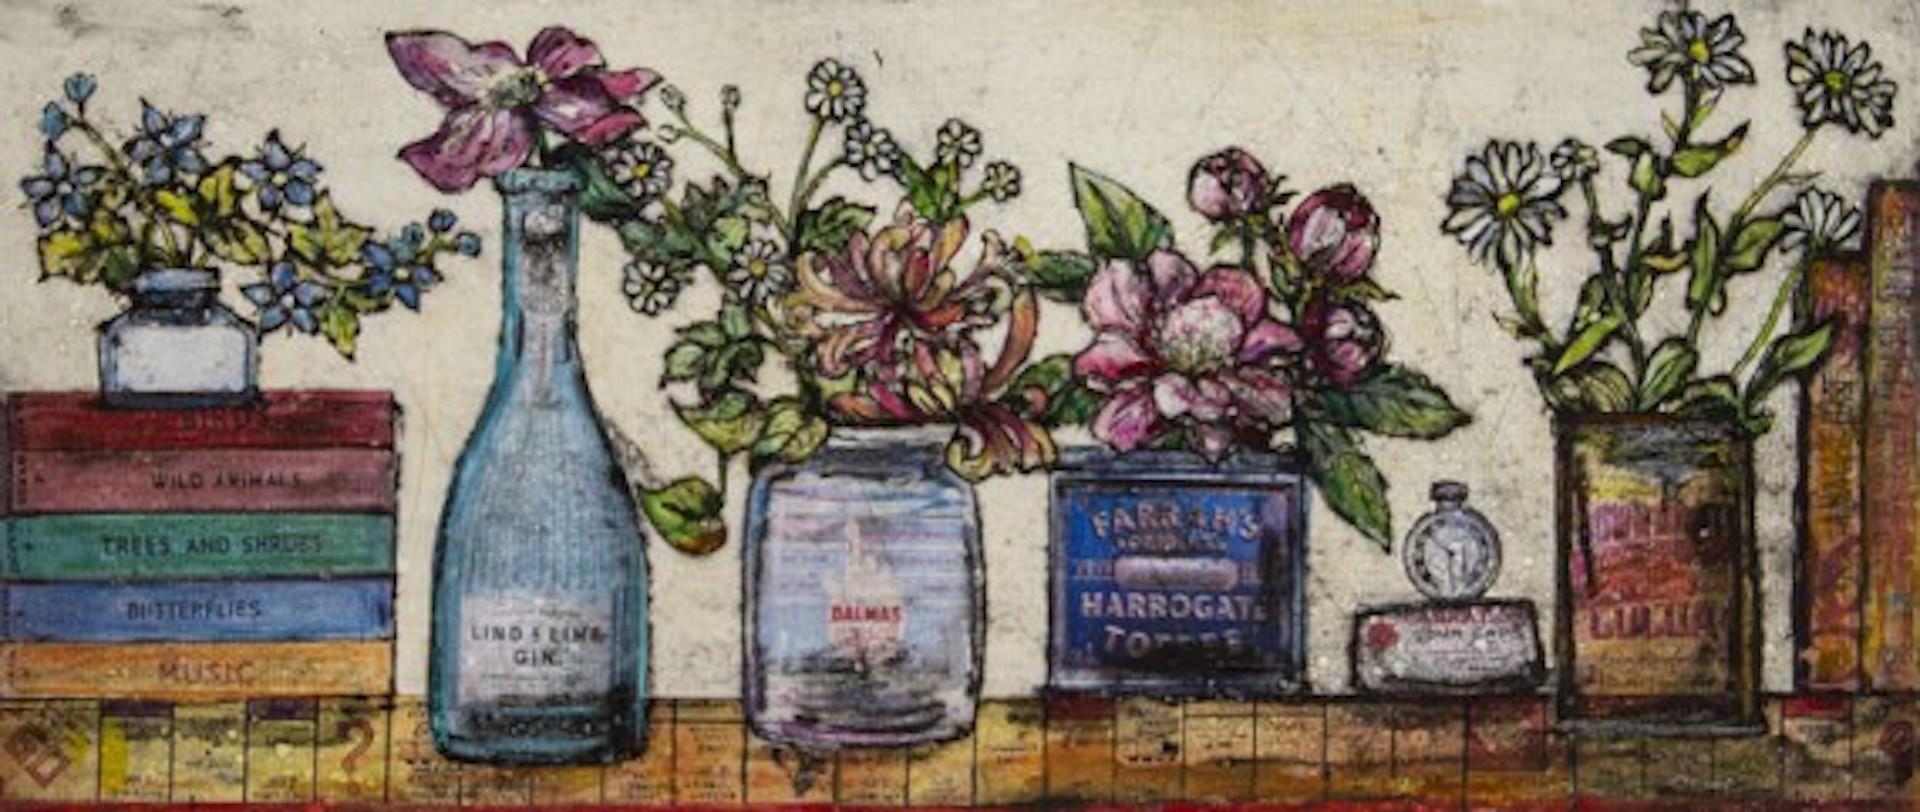 A Rush Of Memories, Vicky Oldfield, Limited Edition Print, Floral Still Life Art